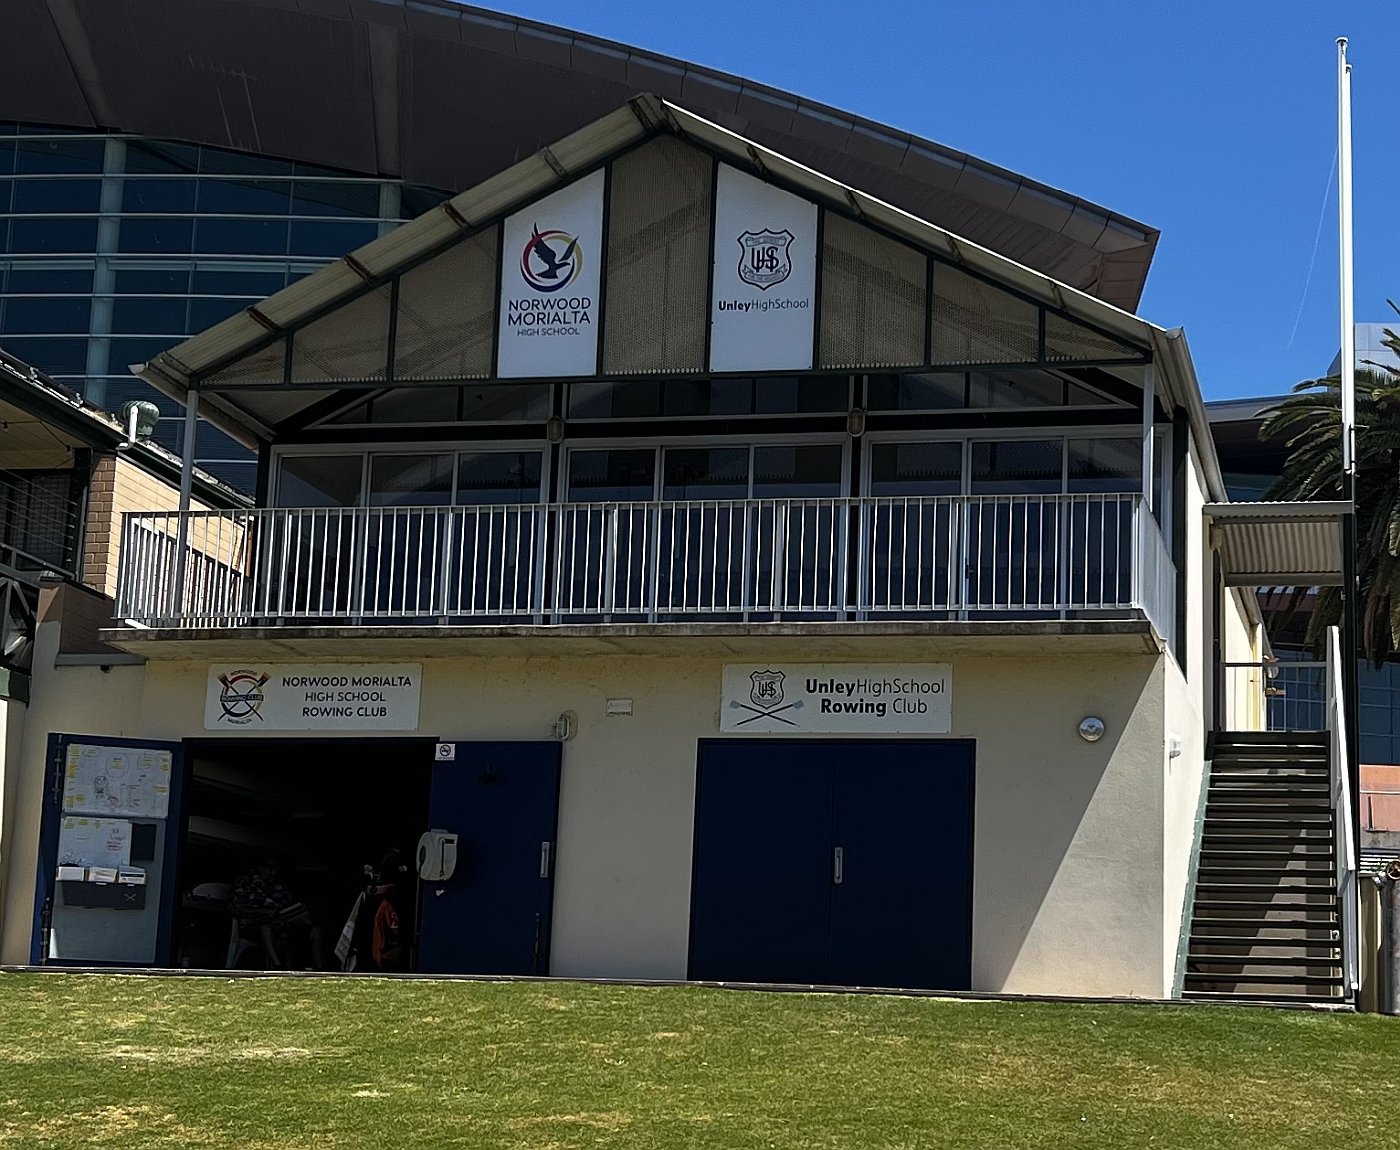 Norwood-Morialta High School and Unley High School rowing shed